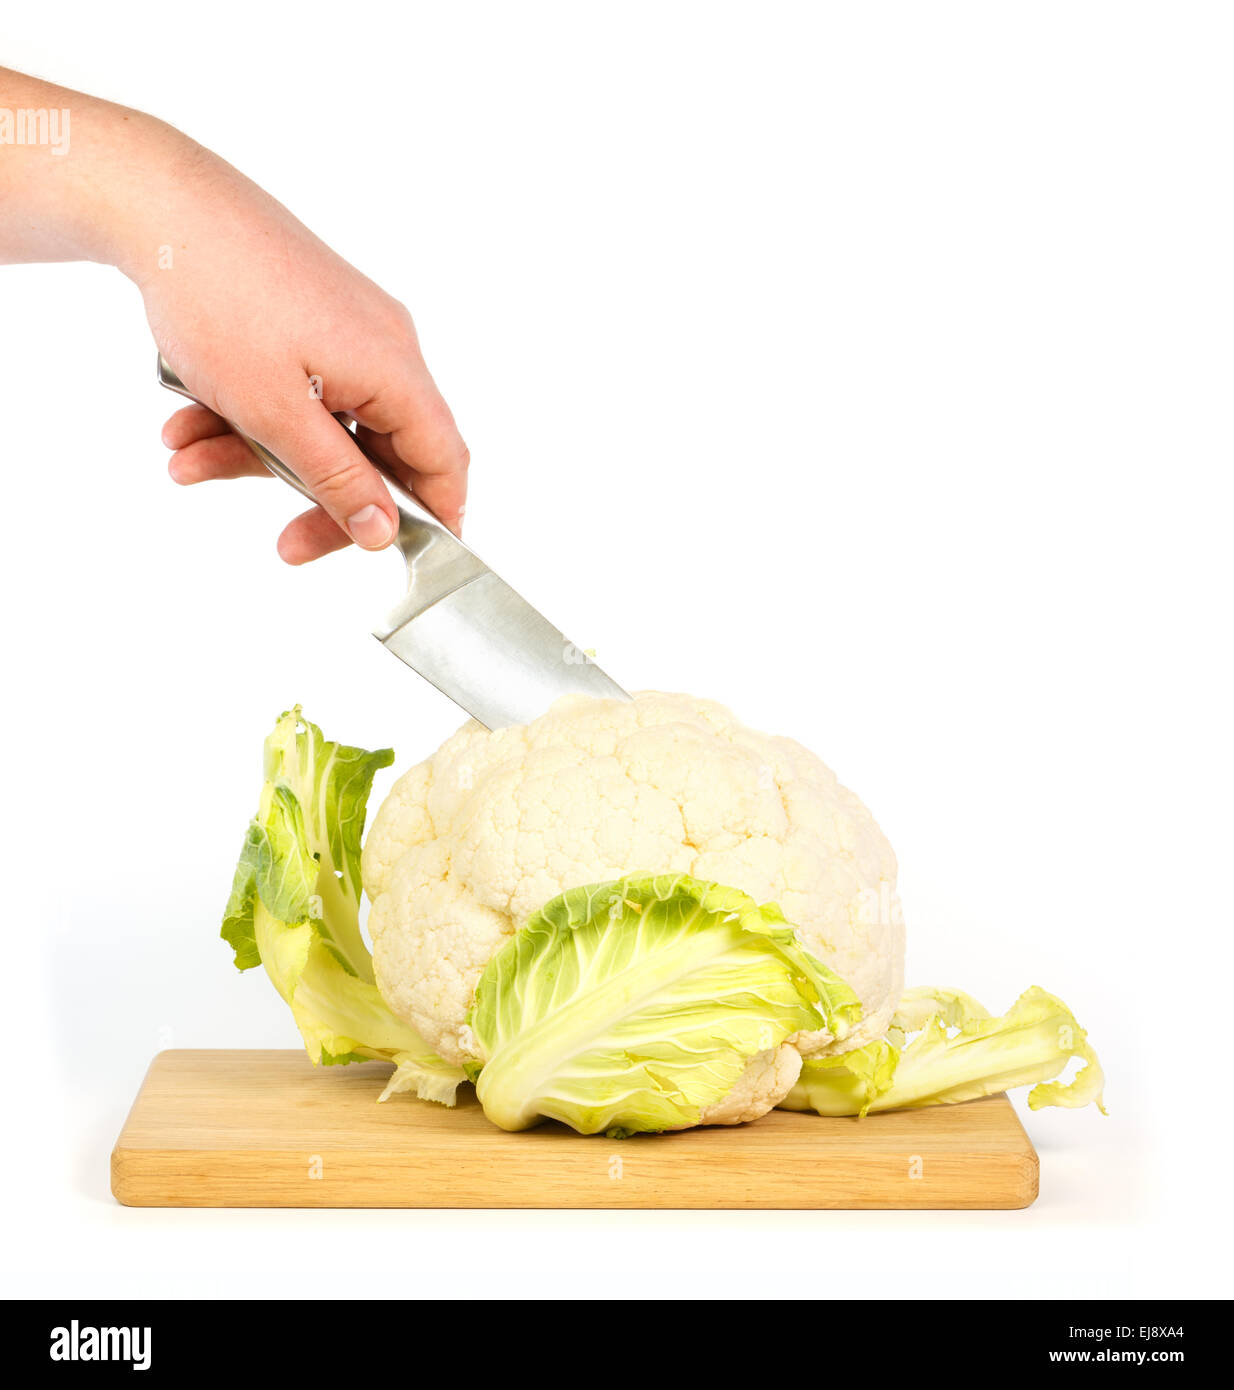 Hand cuts with a knife through a cauliflower on wooden cutting board Stock Photo